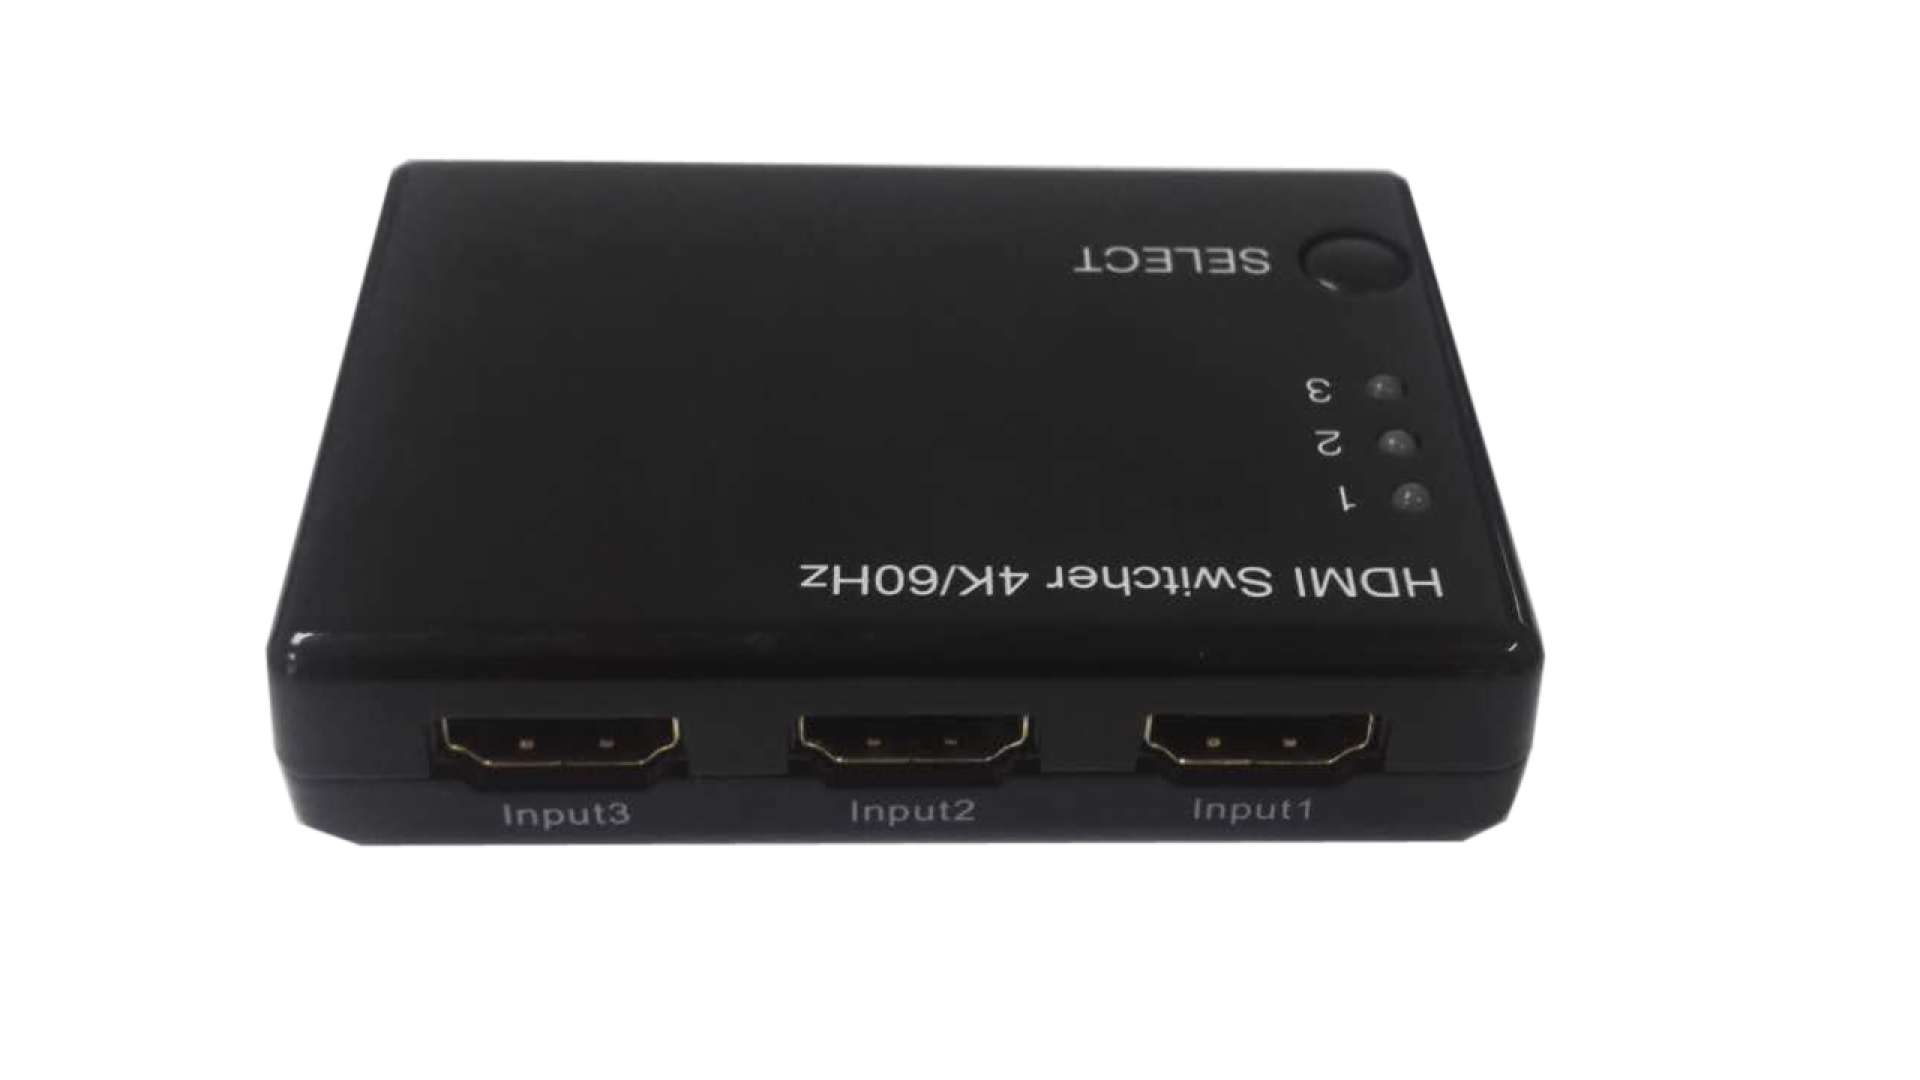 HDMI Switch 3-Port, supports 3D/1080p, HDCP, incl. remote control